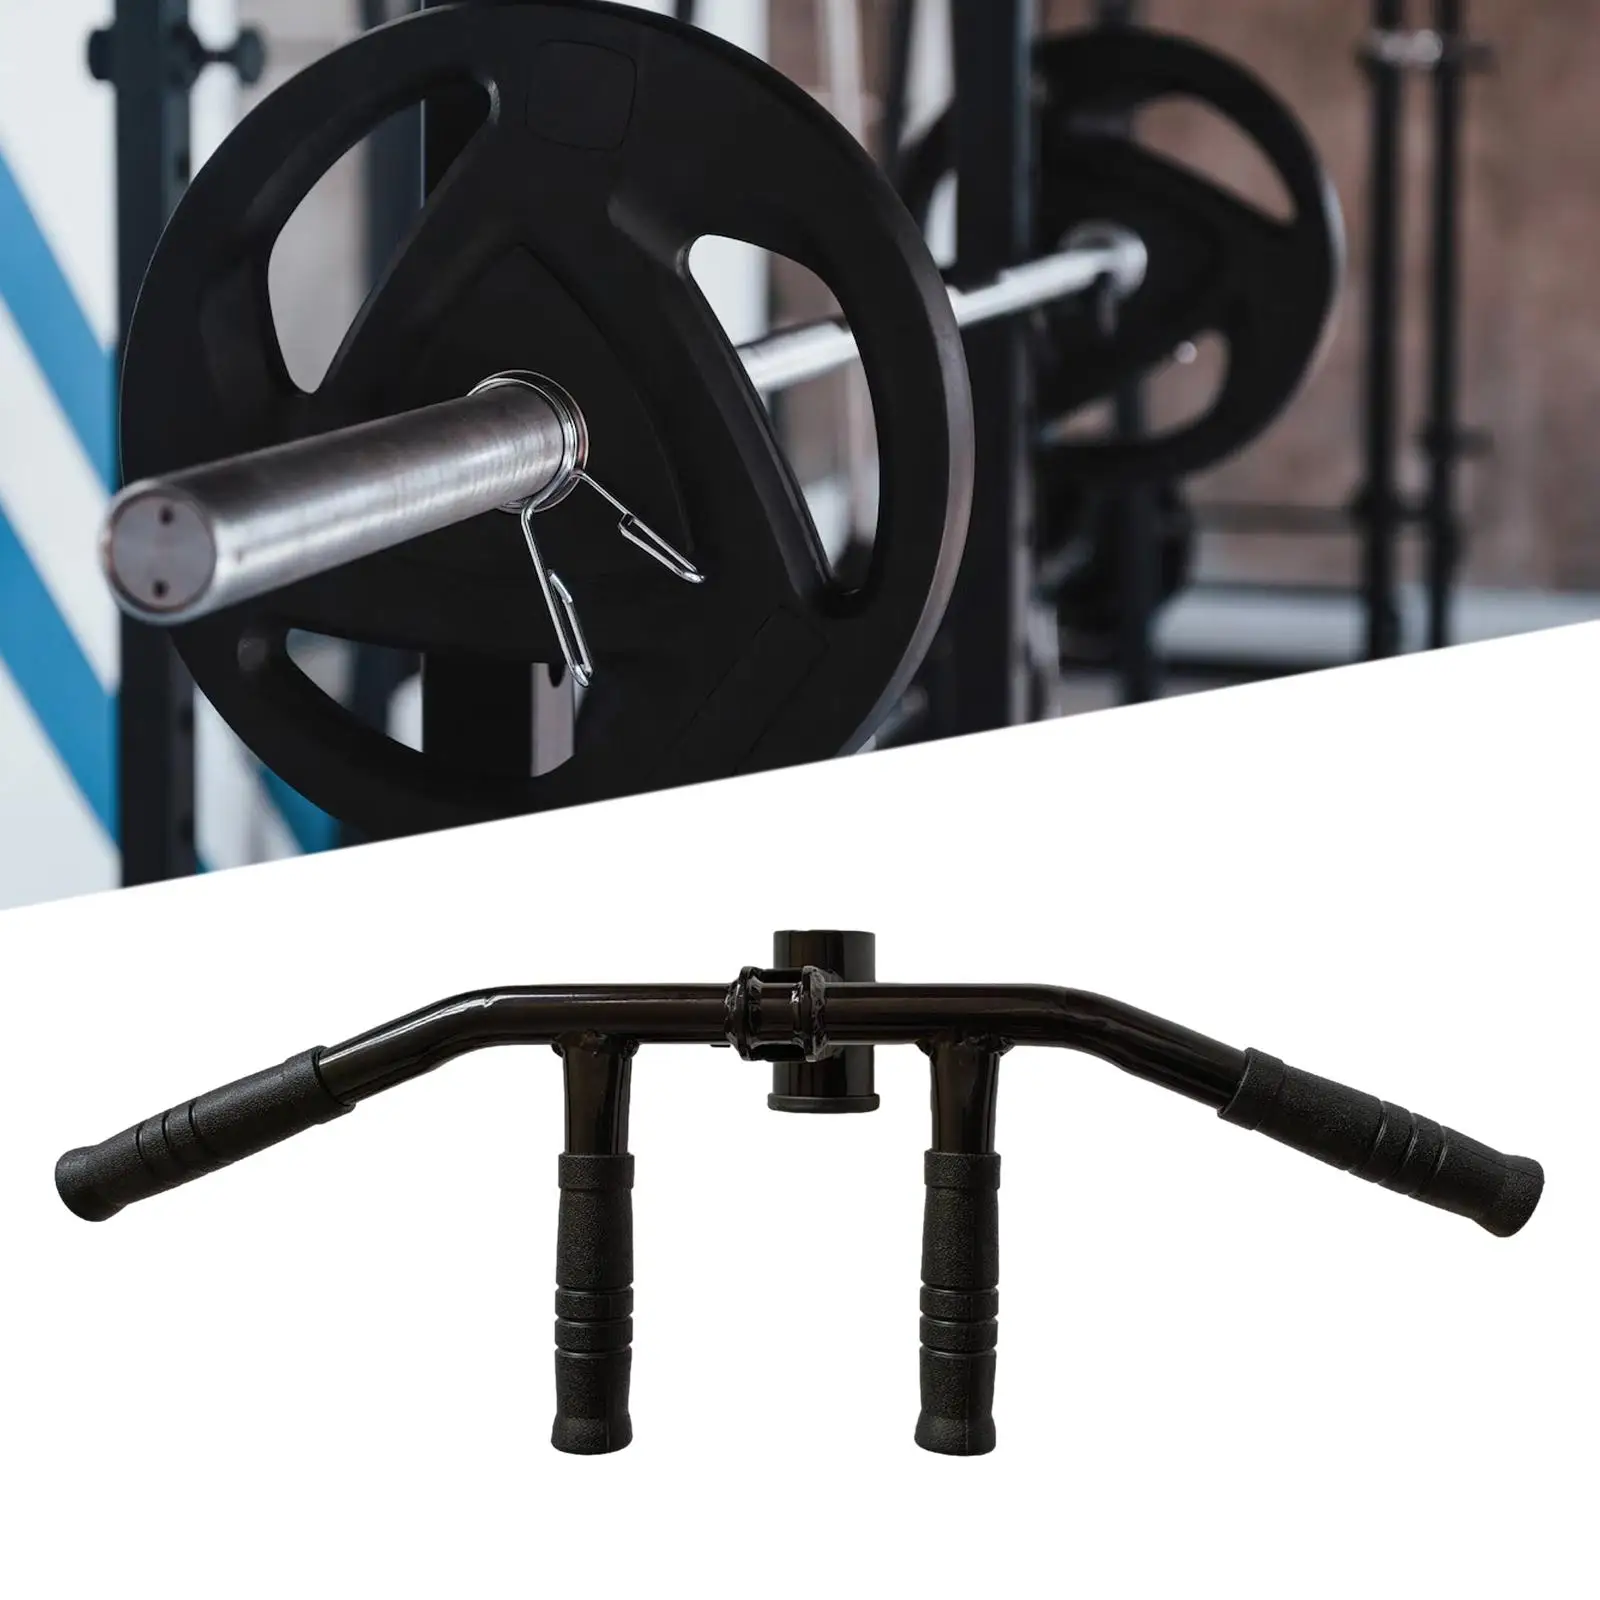 LAT Bar Easy to Install Durable T Bar Row Attachment Fitness Spreader Bar for Gym Workout Muscle Building Home Weight Lifting